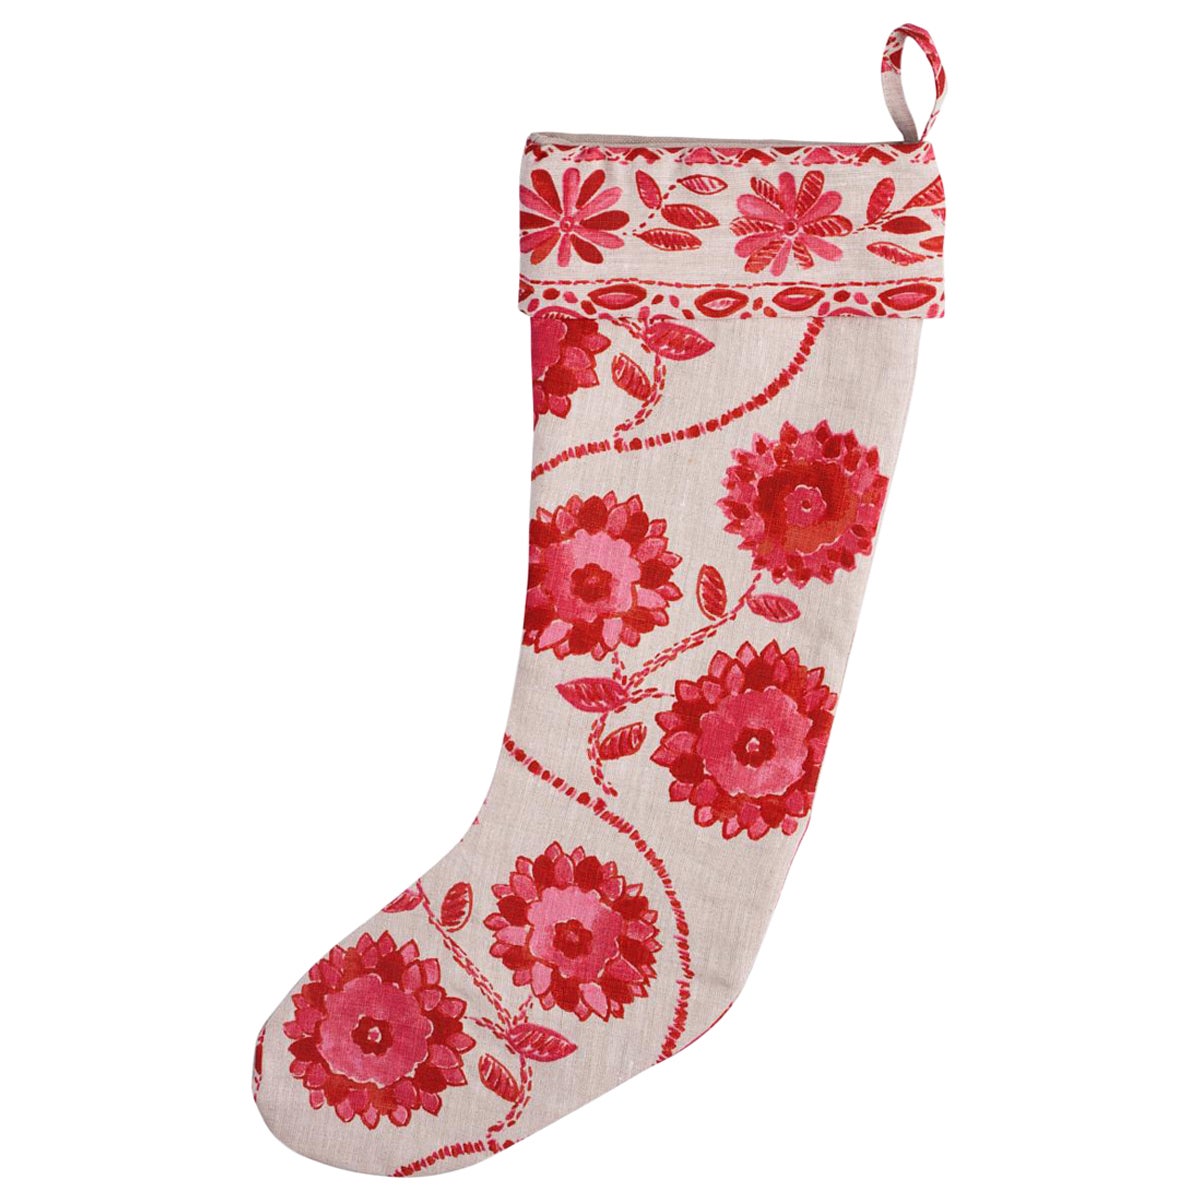 Schumacher Limited Edition Zinnia Handmade Print Christmas Stocking in Pink For Sale